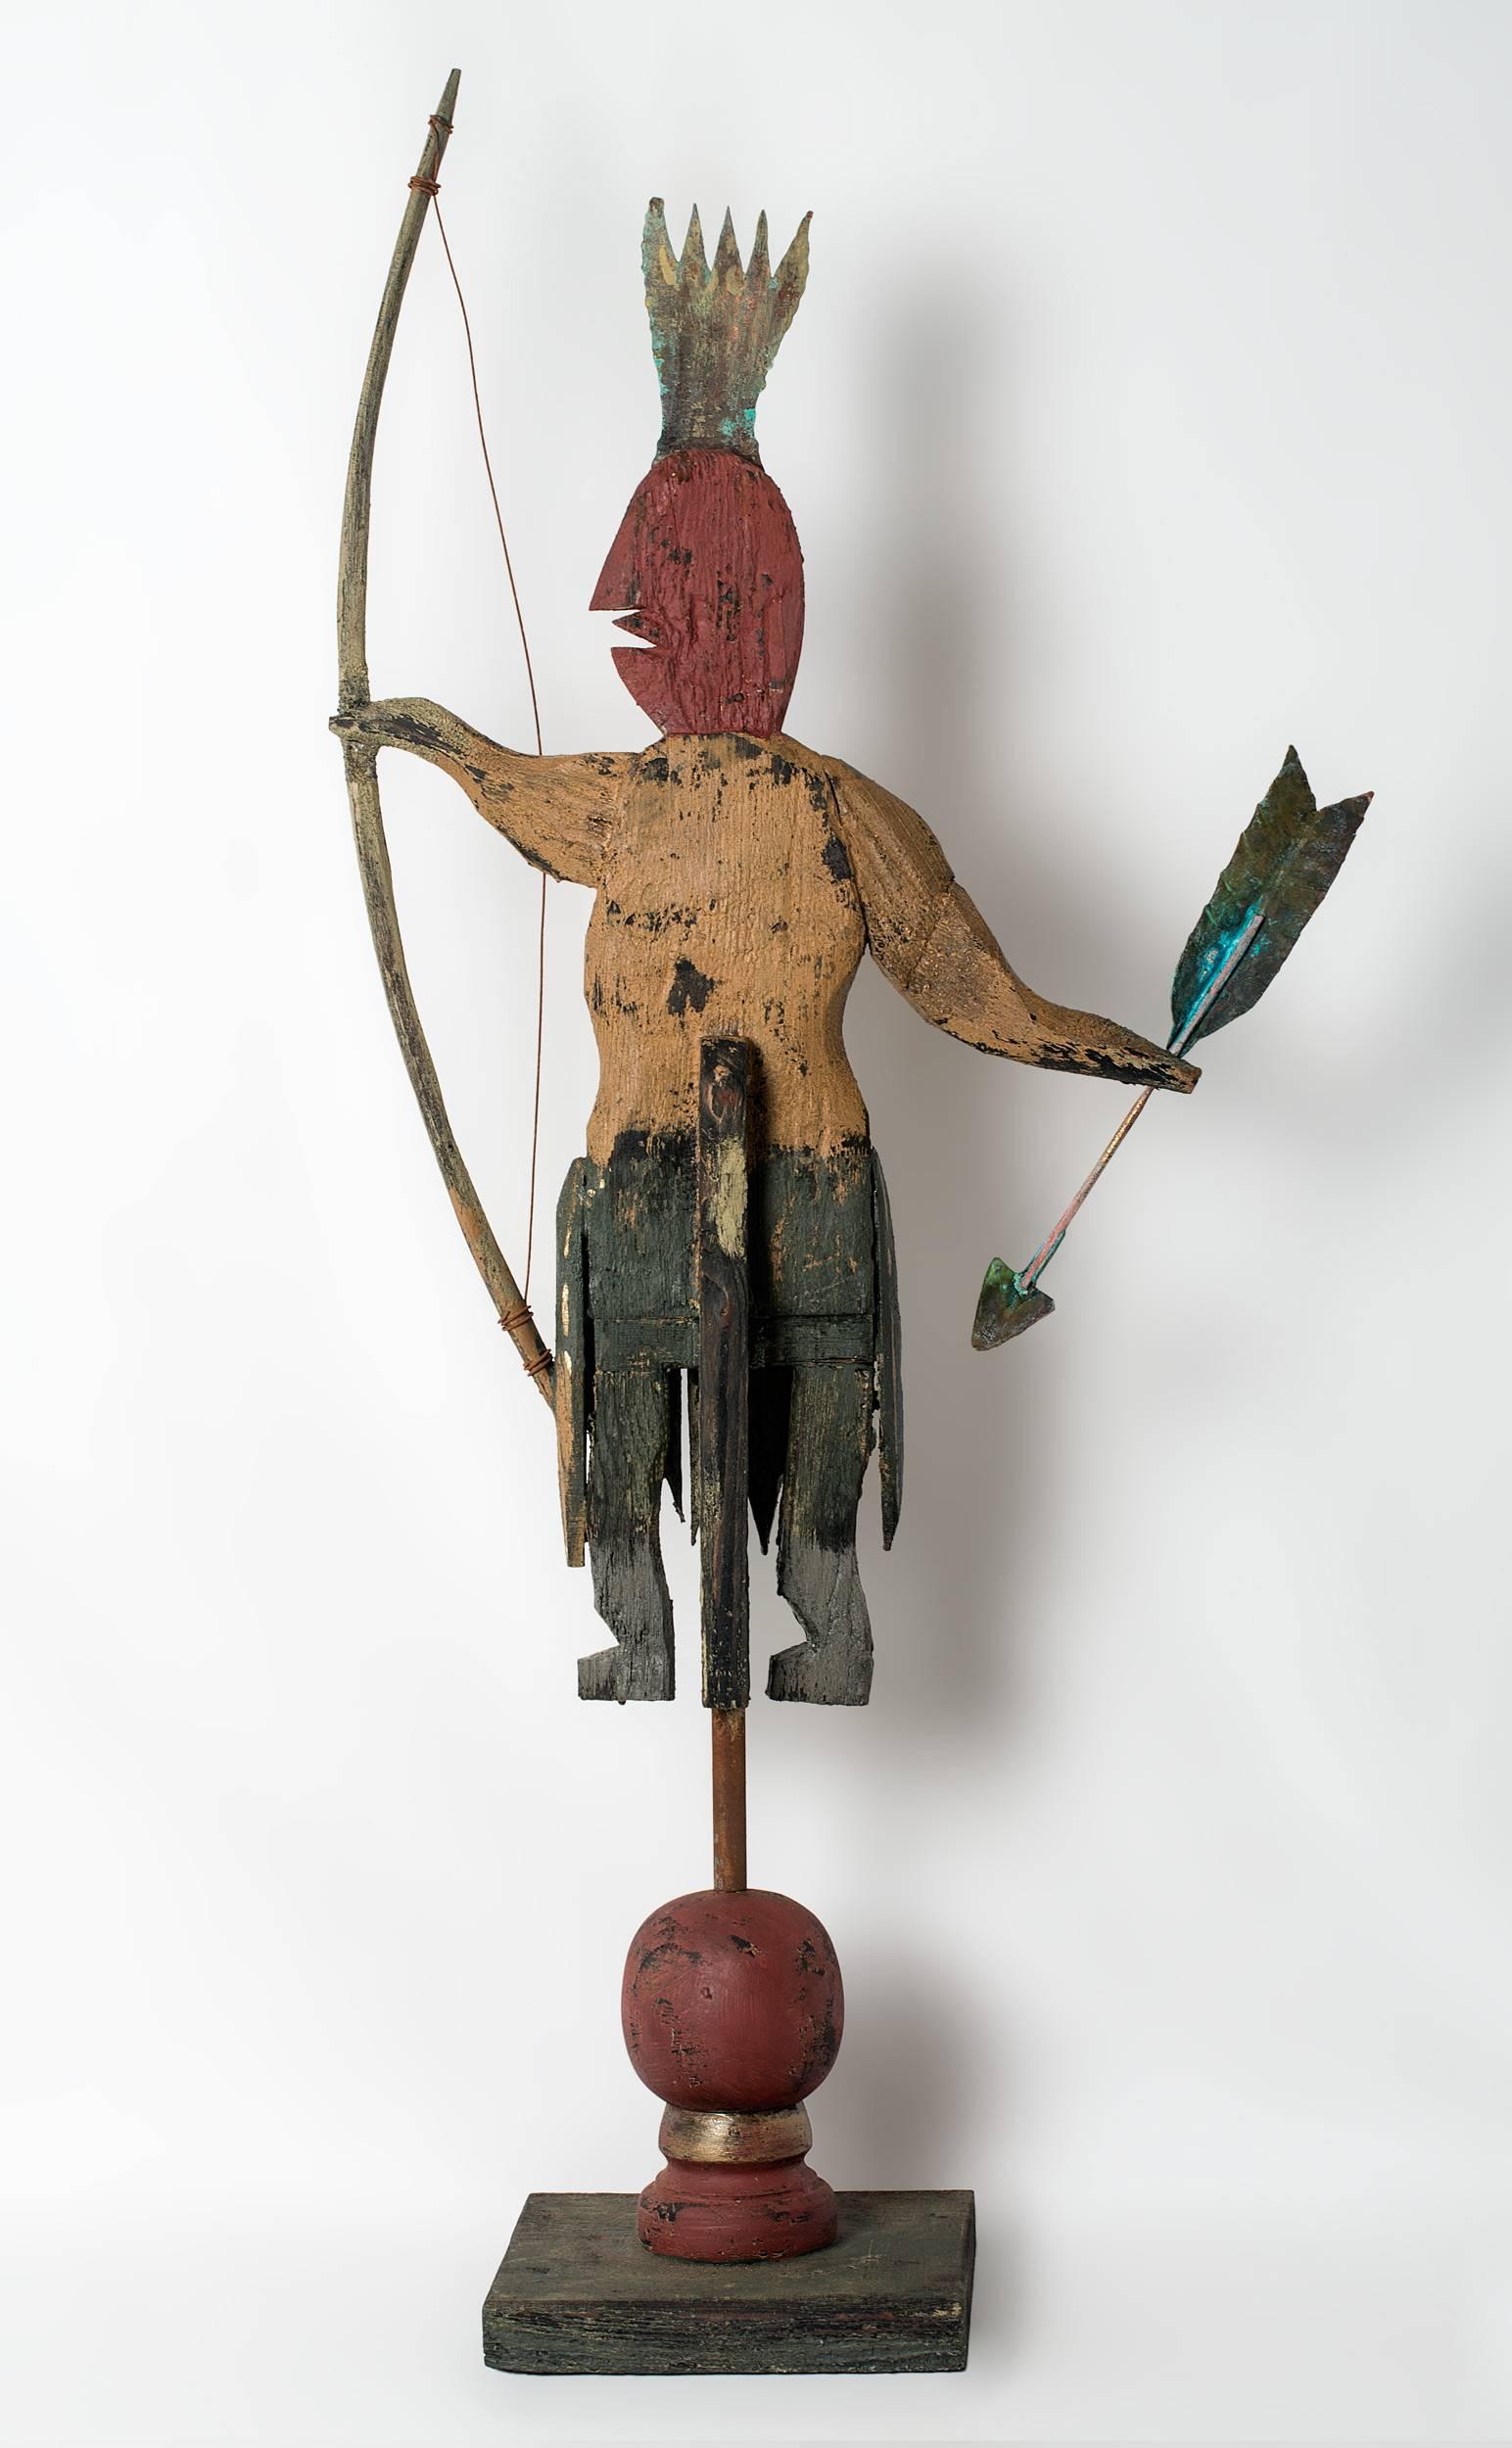 Carved and painted standing Indian with bow and arrow.
Carved out of reclaimed wood and copper and painted with milk paint by Steve Hazlett. One hundred plus year old heart pine salvaged from out buildings and barns built during the 19th century